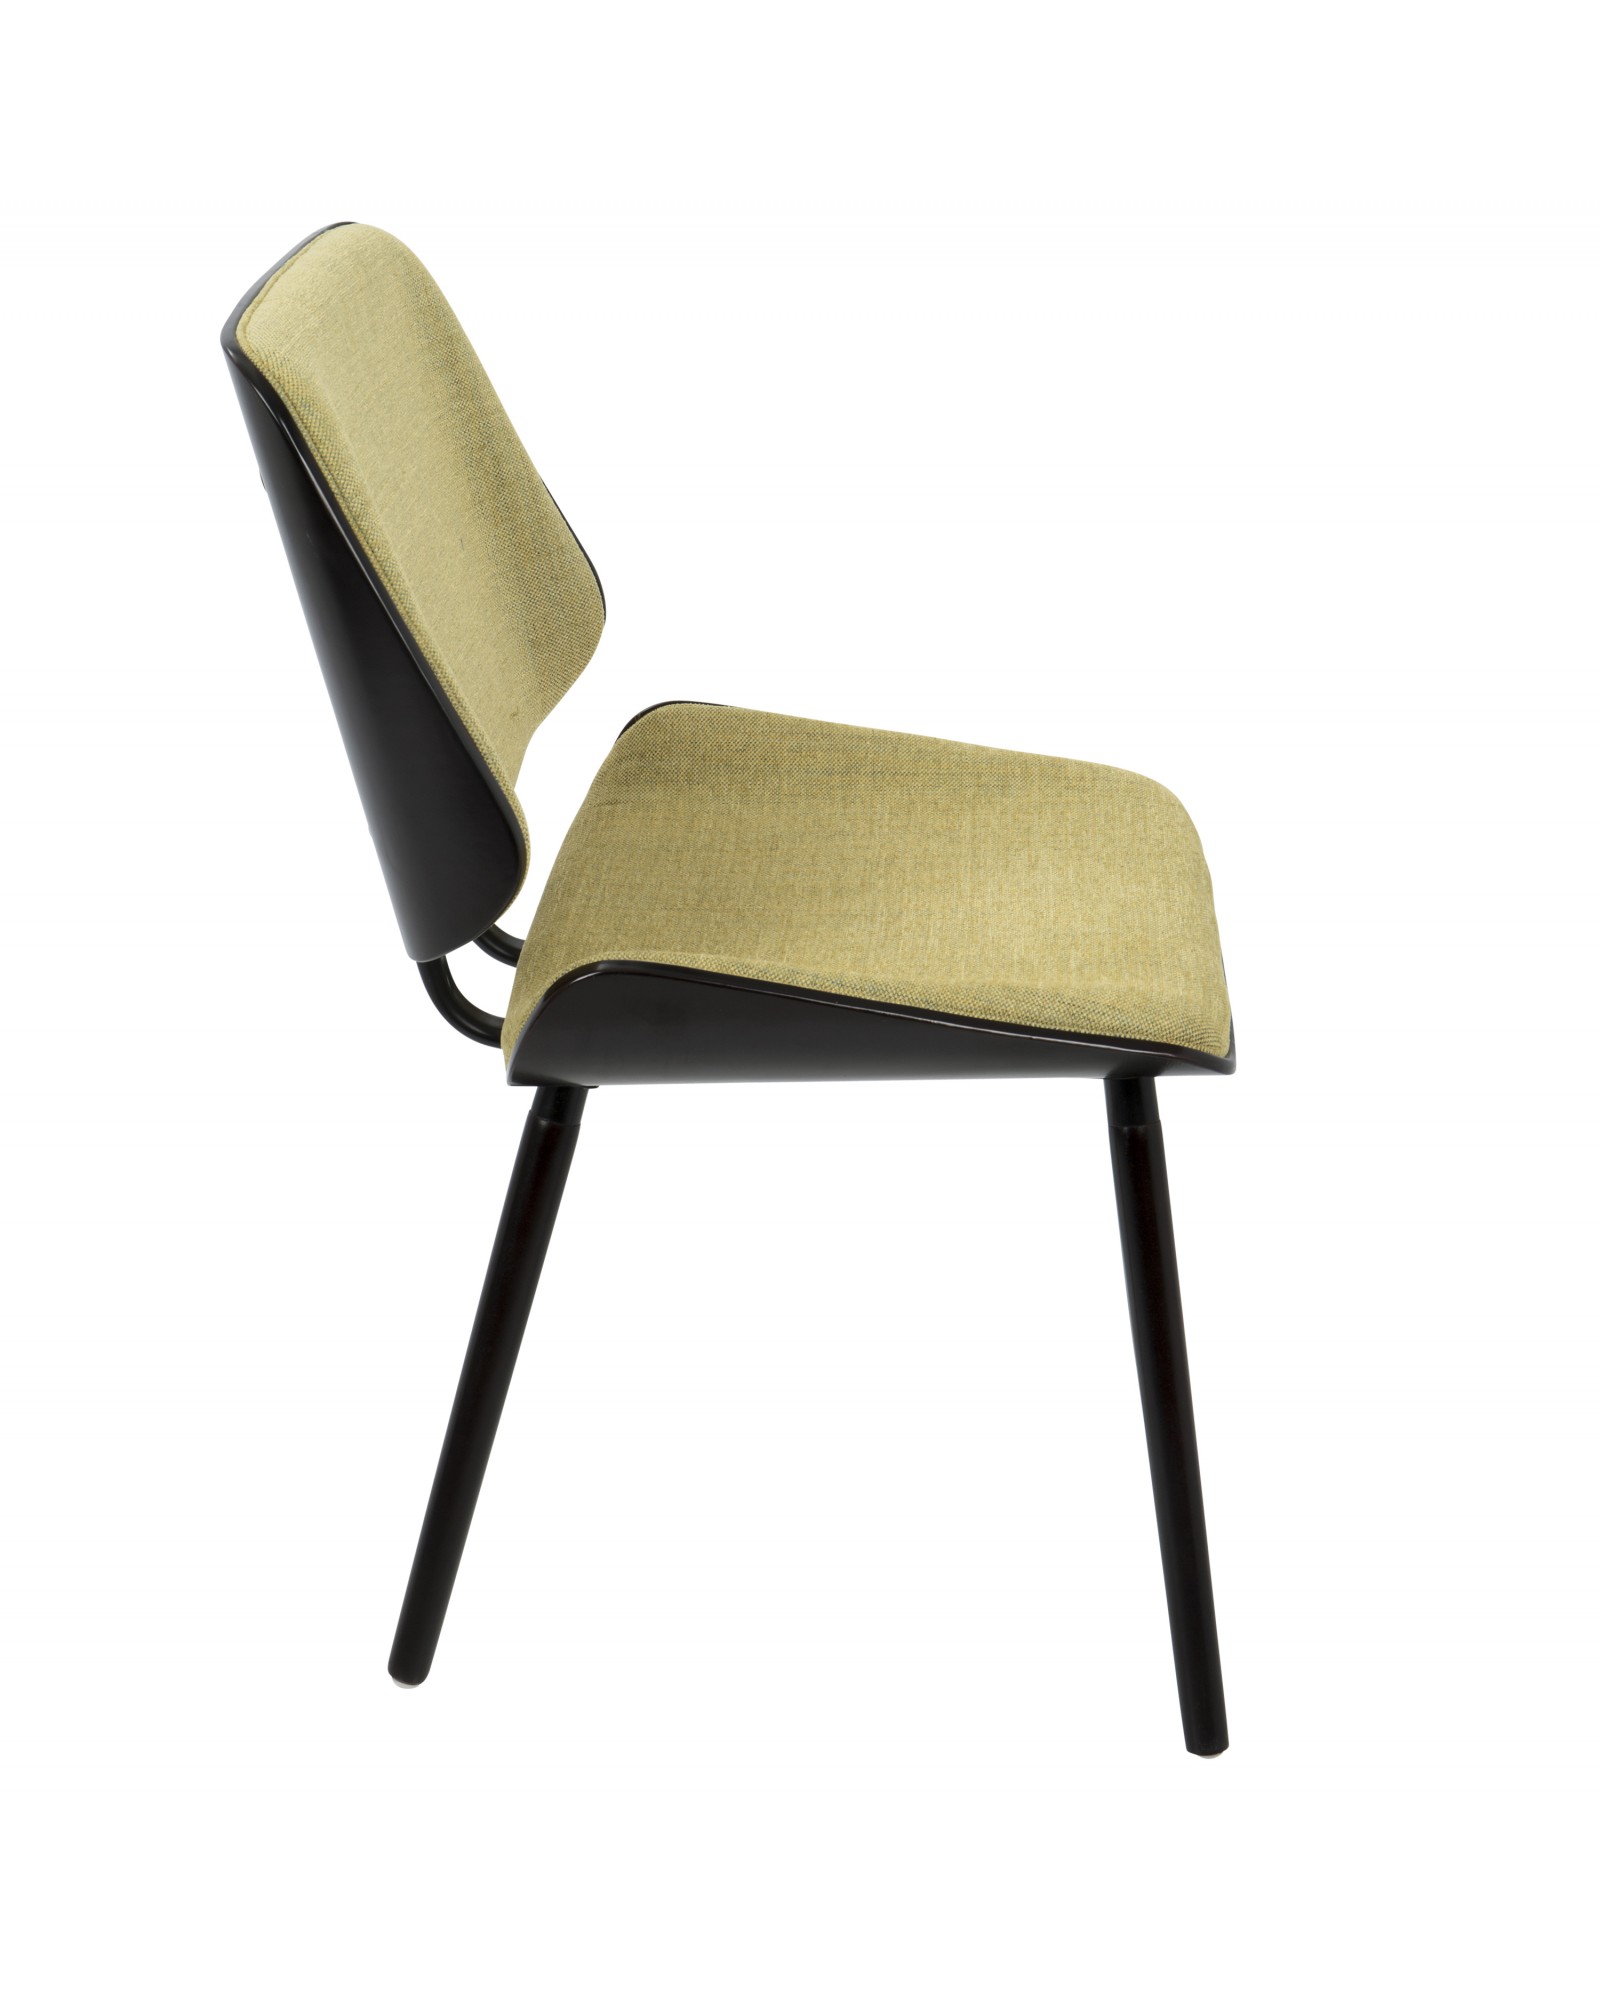 Lombardi Mid-Century Modern Dining/Accent Chair in Espresso with Yellow Fabric - Set of 2